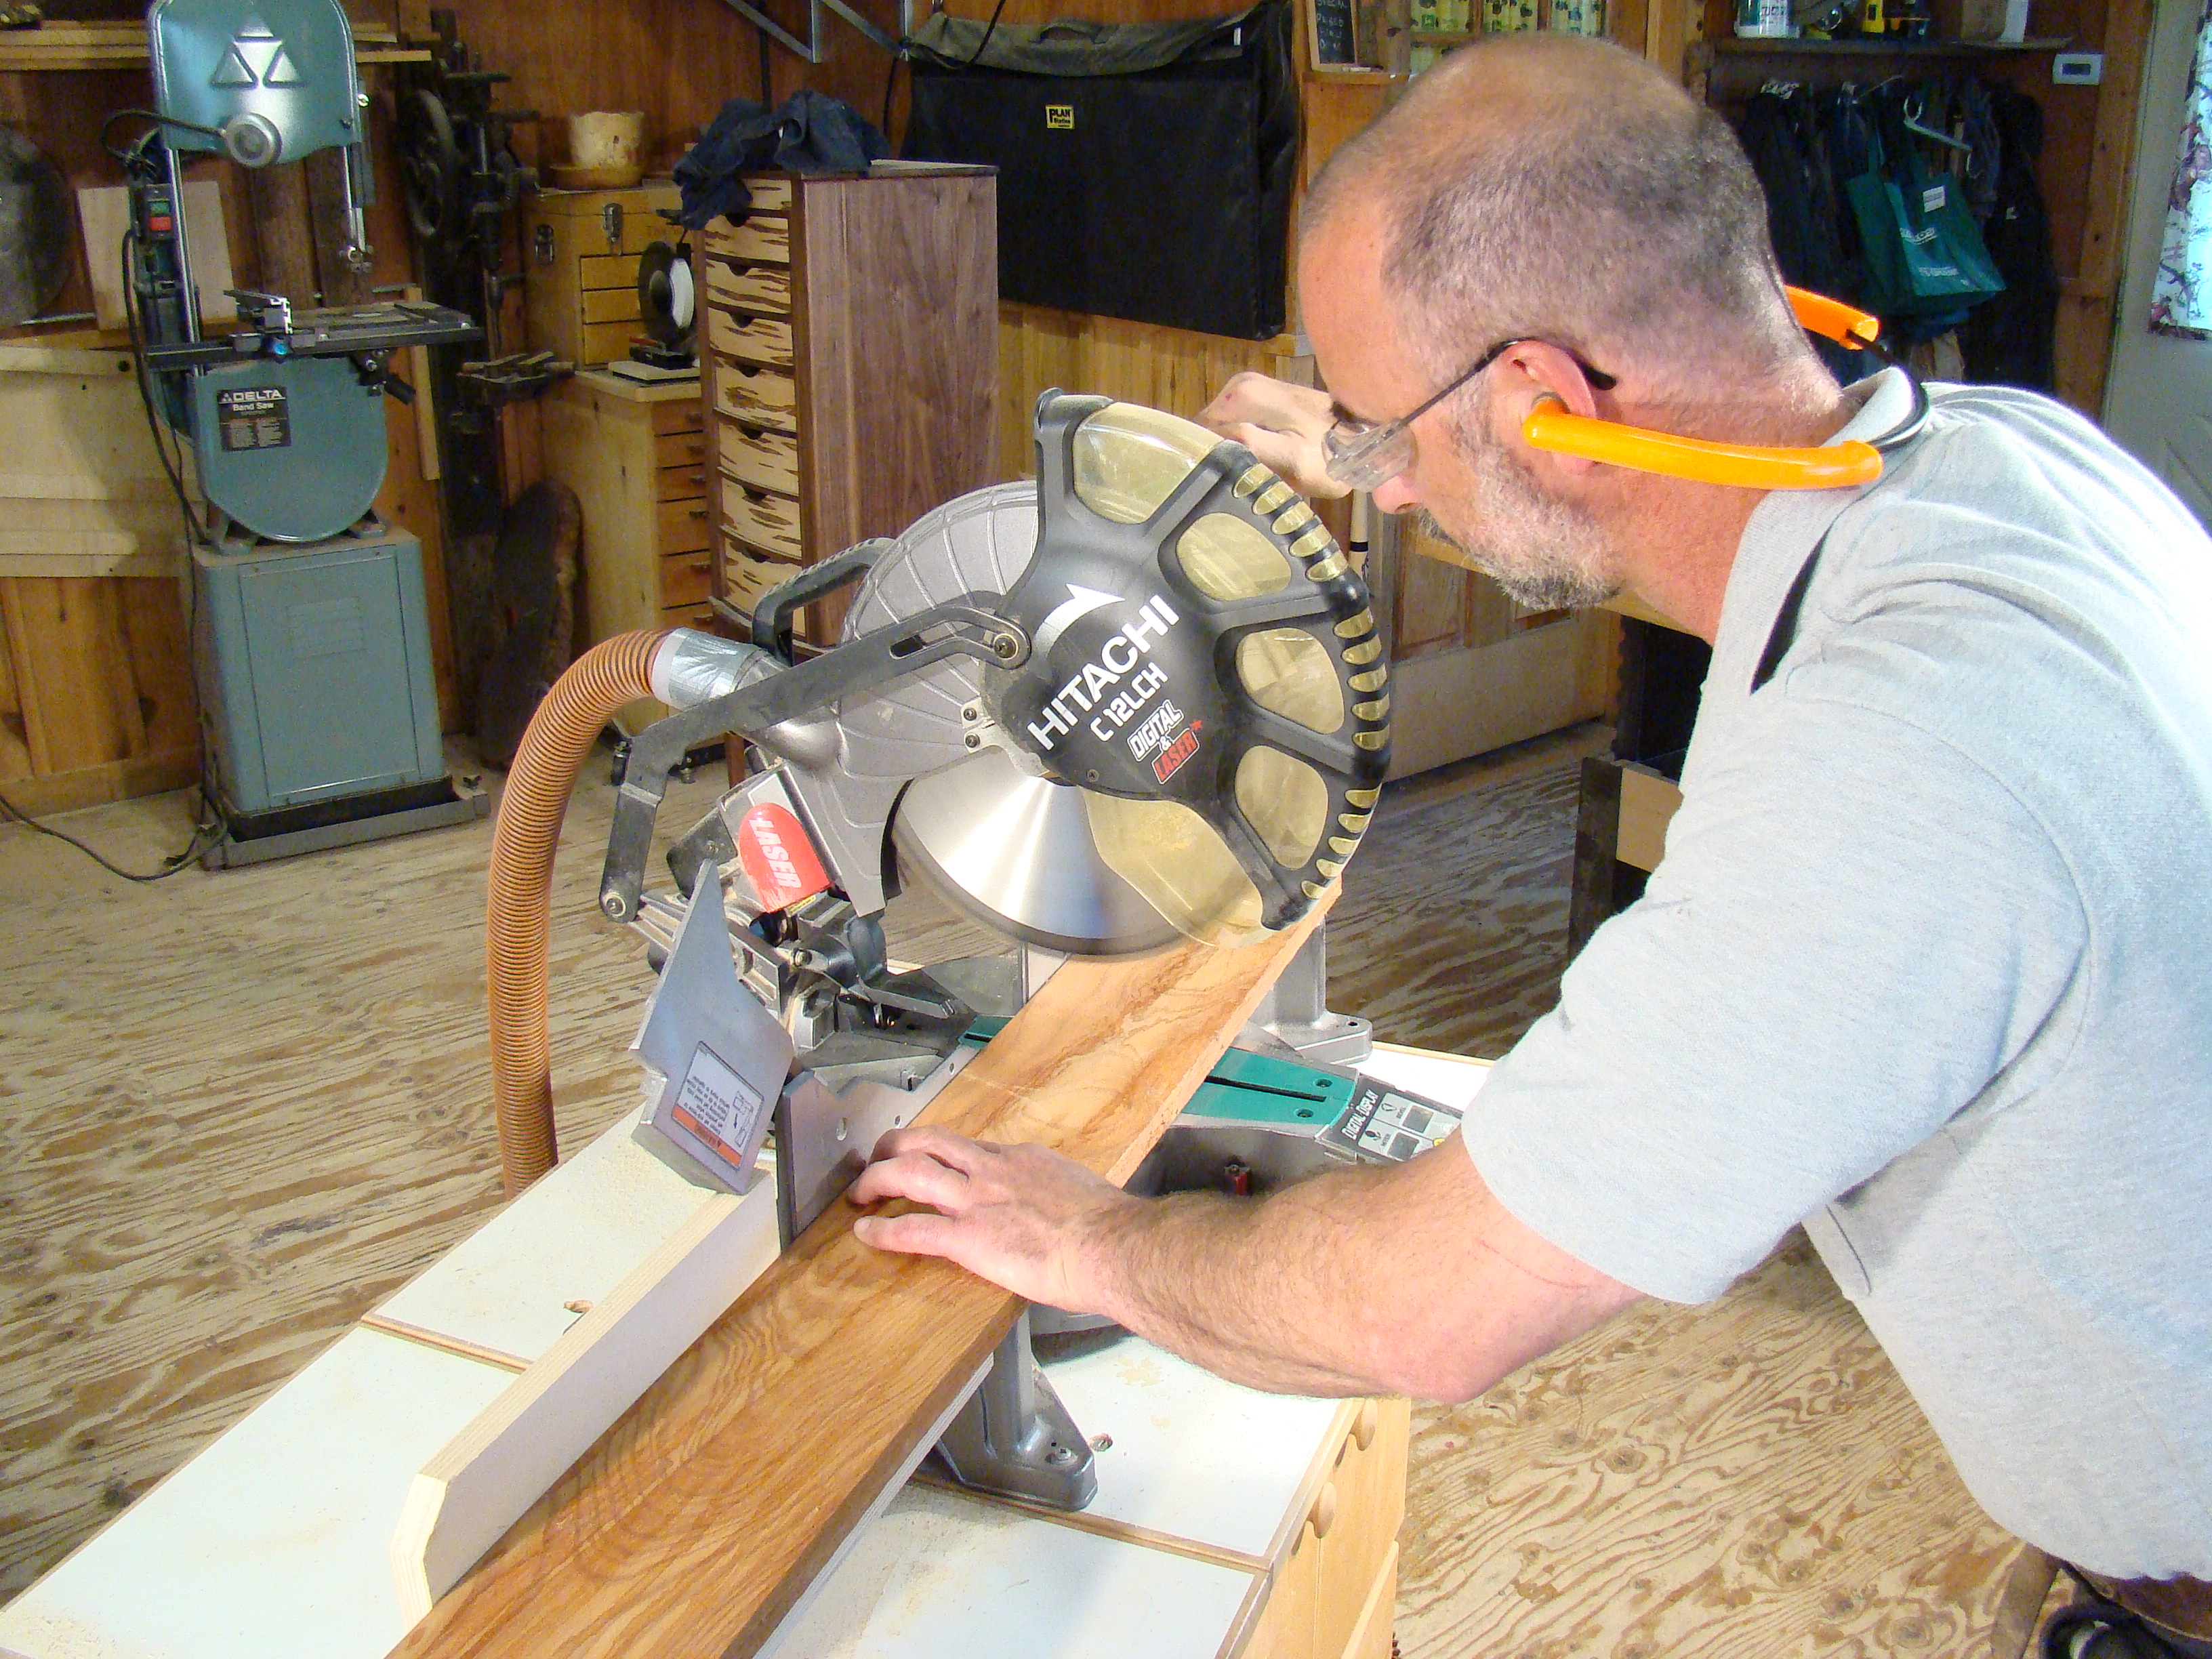 How To Measure And Cut A 45 Degree Angle Cut In Wood: Expert Tips